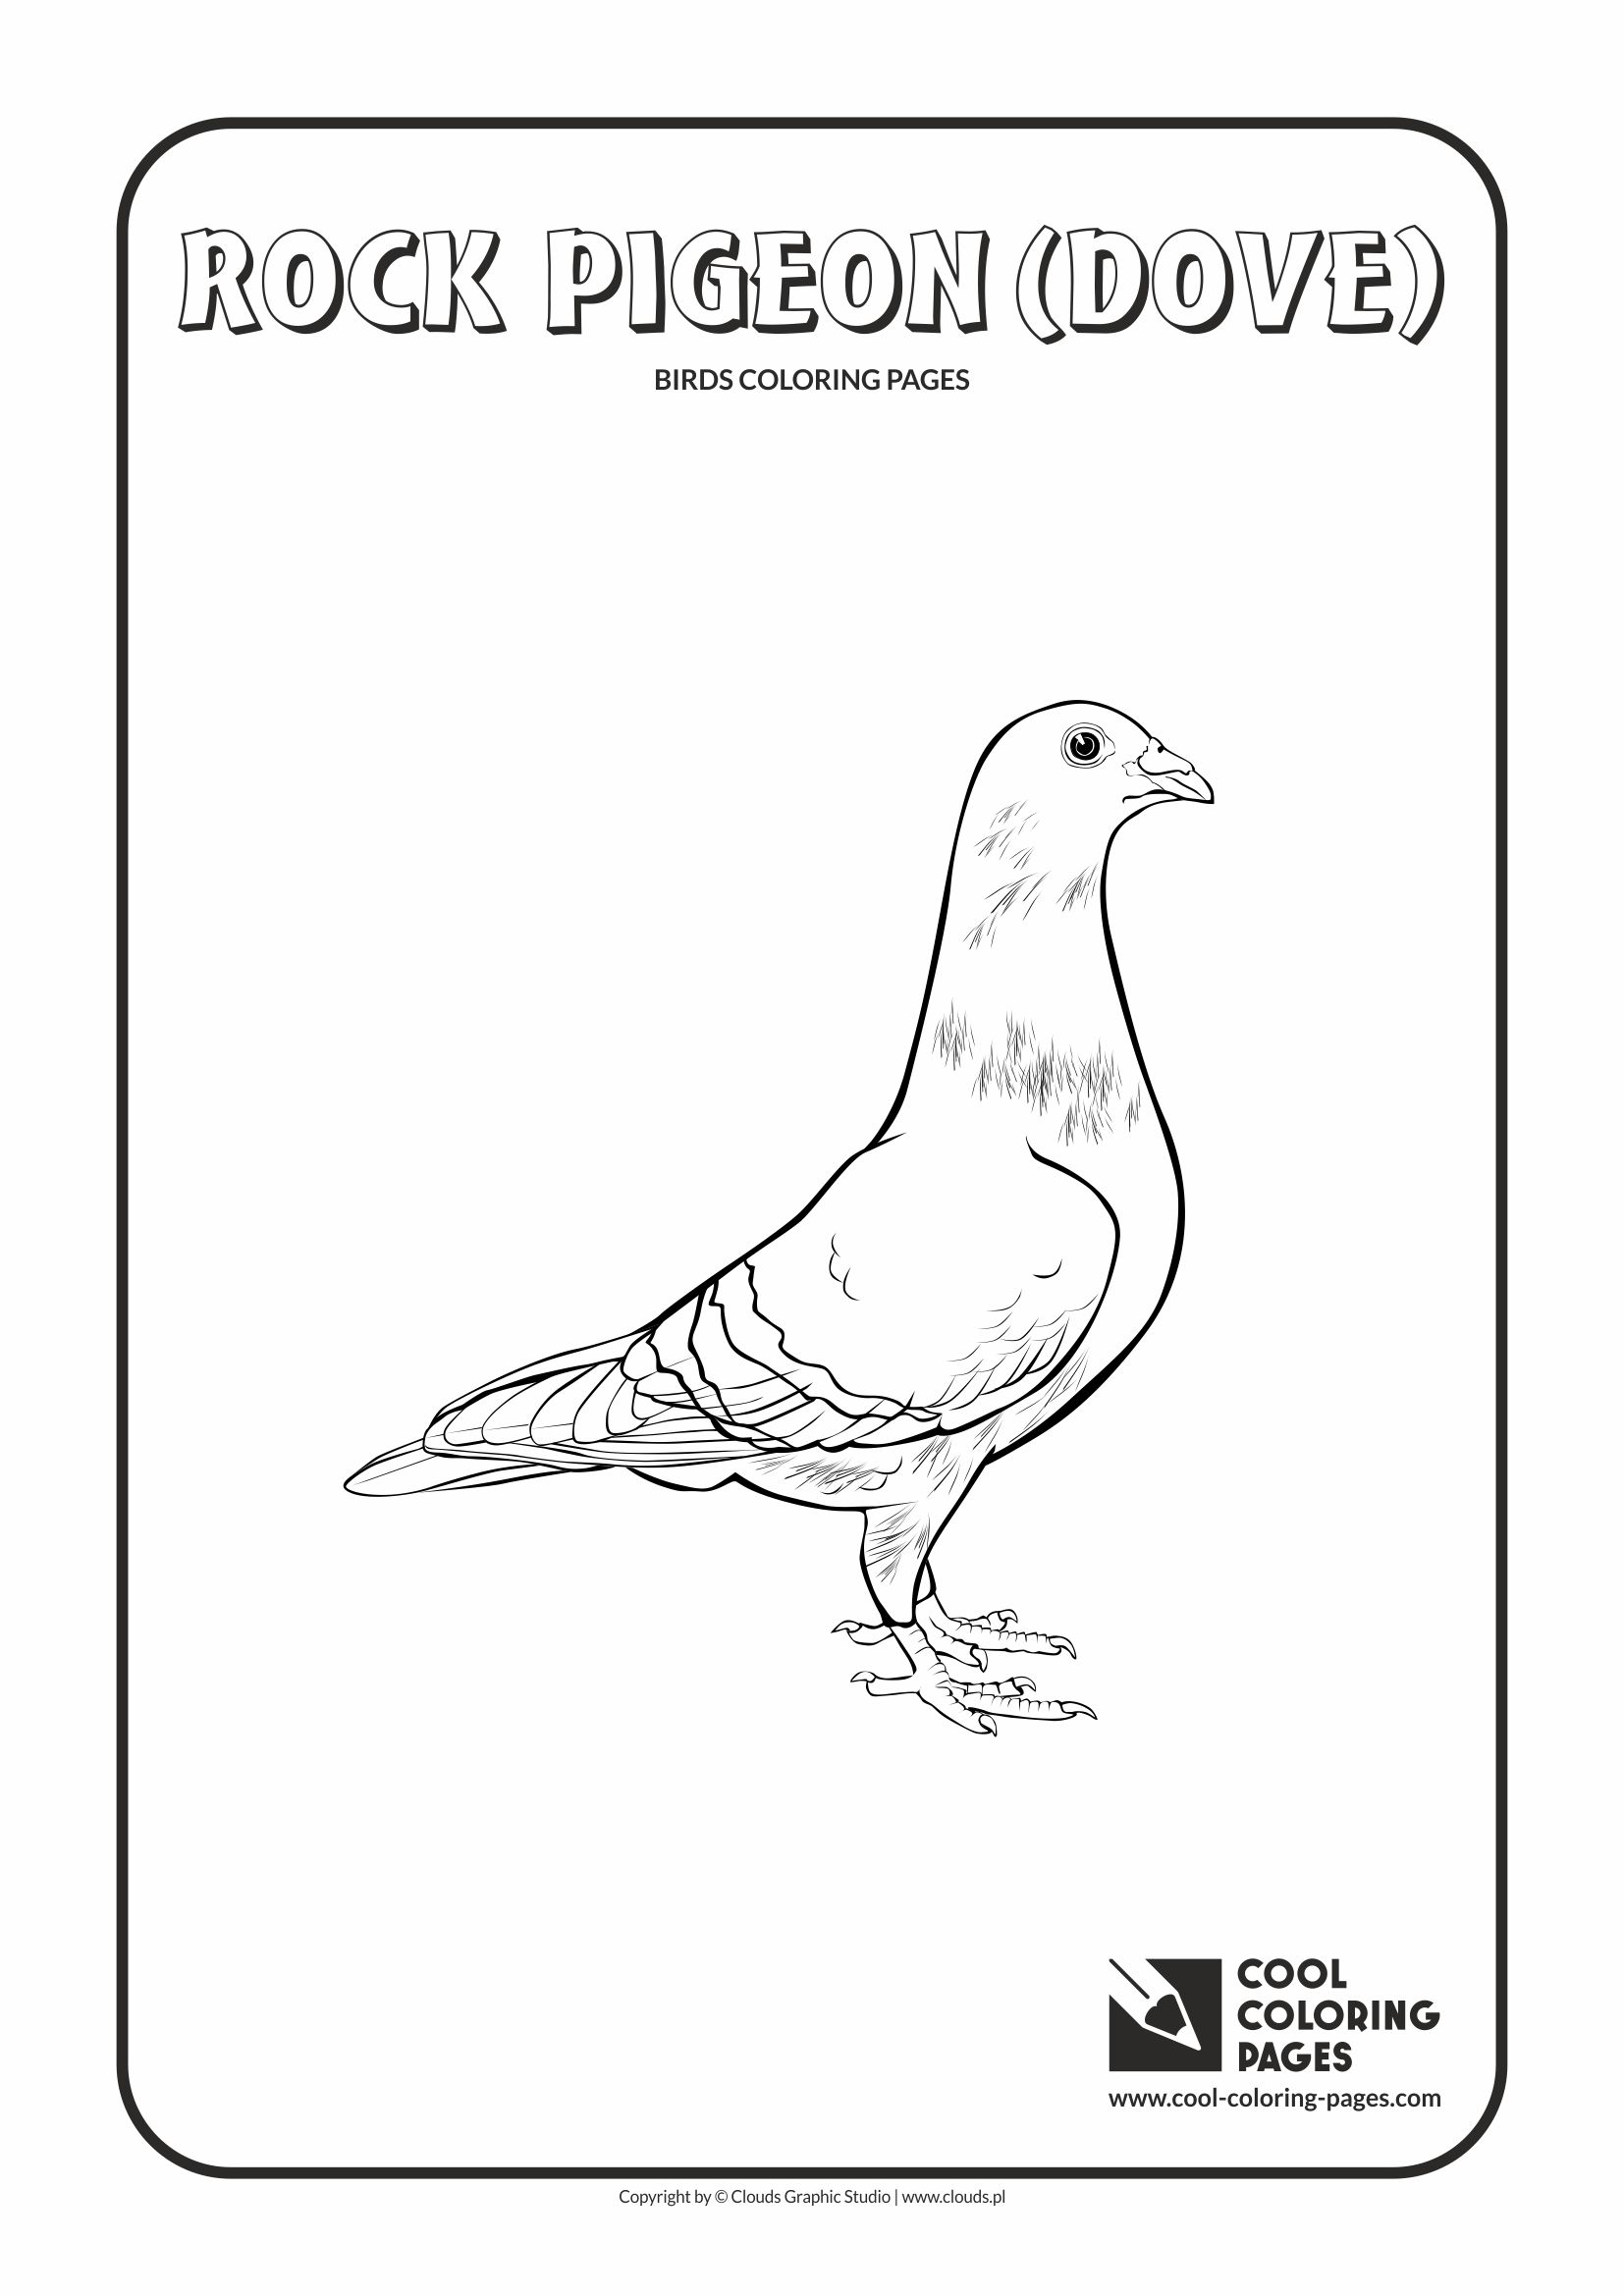 Cool Coloring Pages - Animals / Rock pigeon / Coloring page with rock pigeon